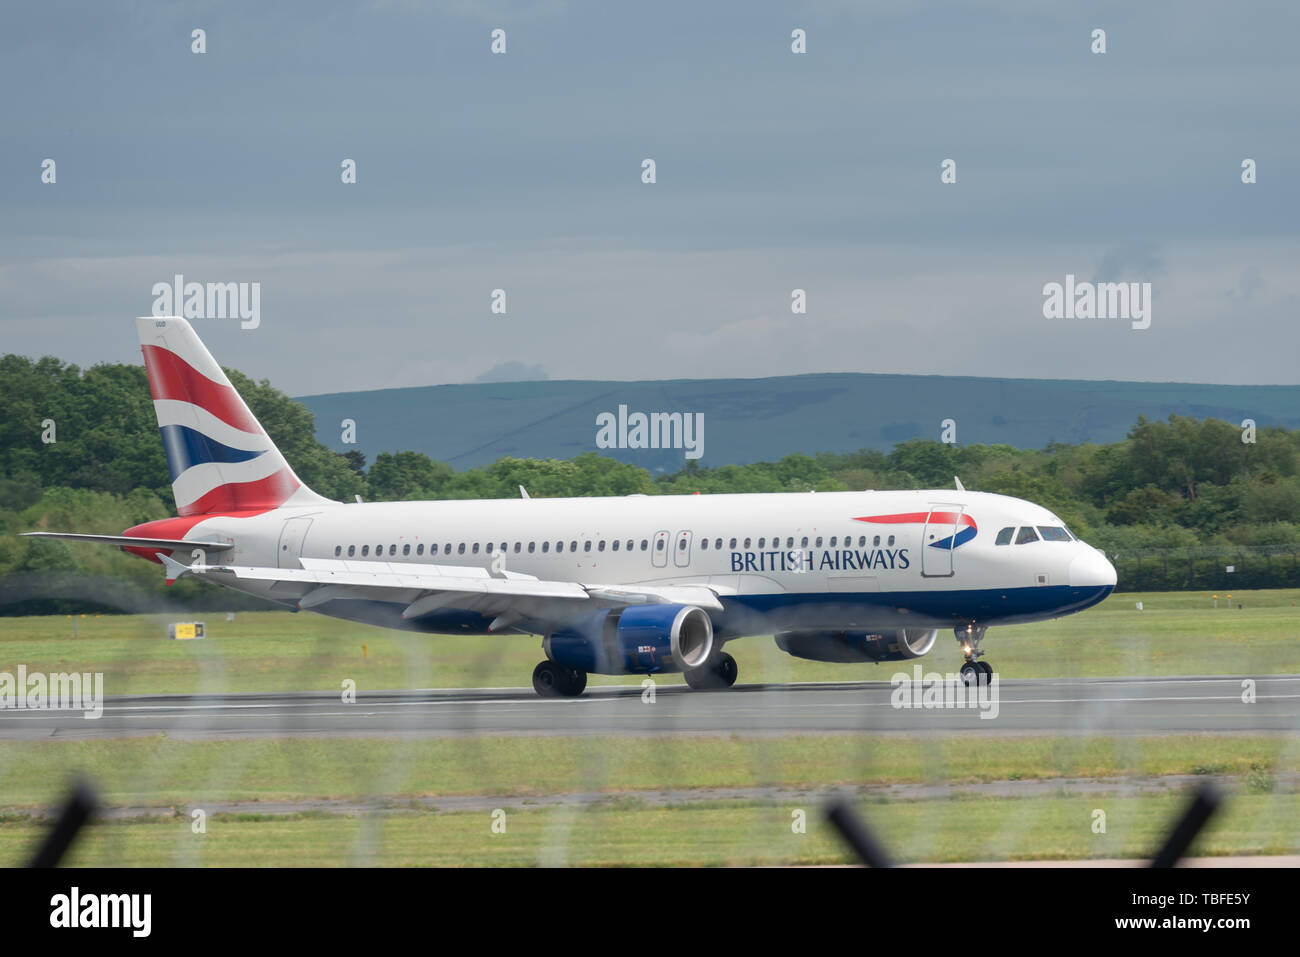 MANCHESTER UK, 30 MAY 2019: British Airways Airbus A320 flight BA1394 from London Heathrow lands on Runway 28R at Manchester Airport. Stock Photo